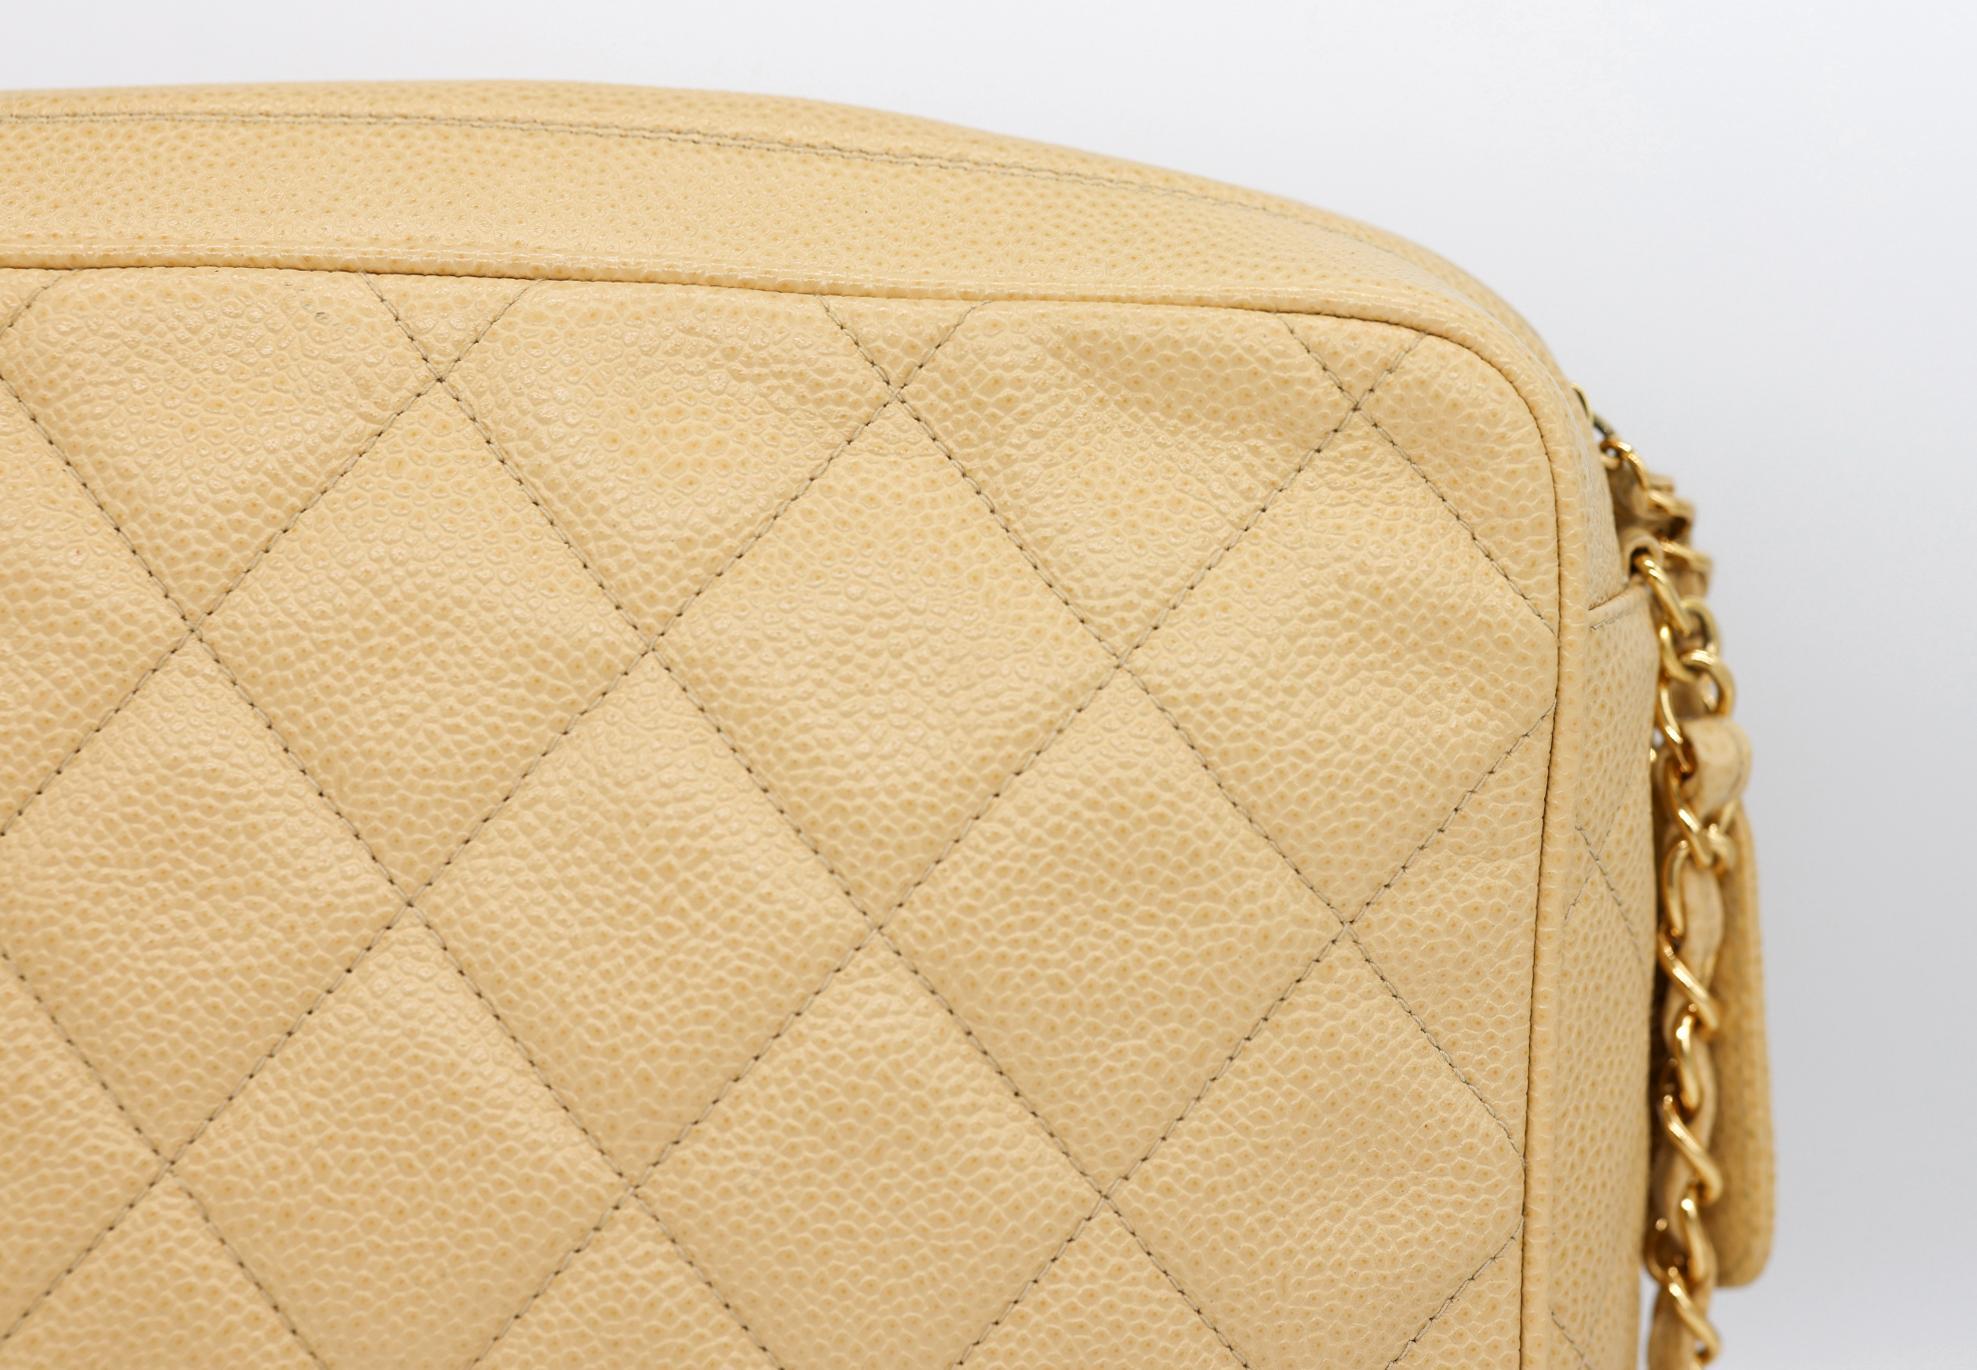 Chanel Vintage Quilted Caviar Leather Camera Bag with Gold Hardware, 1996 - 1997. 2